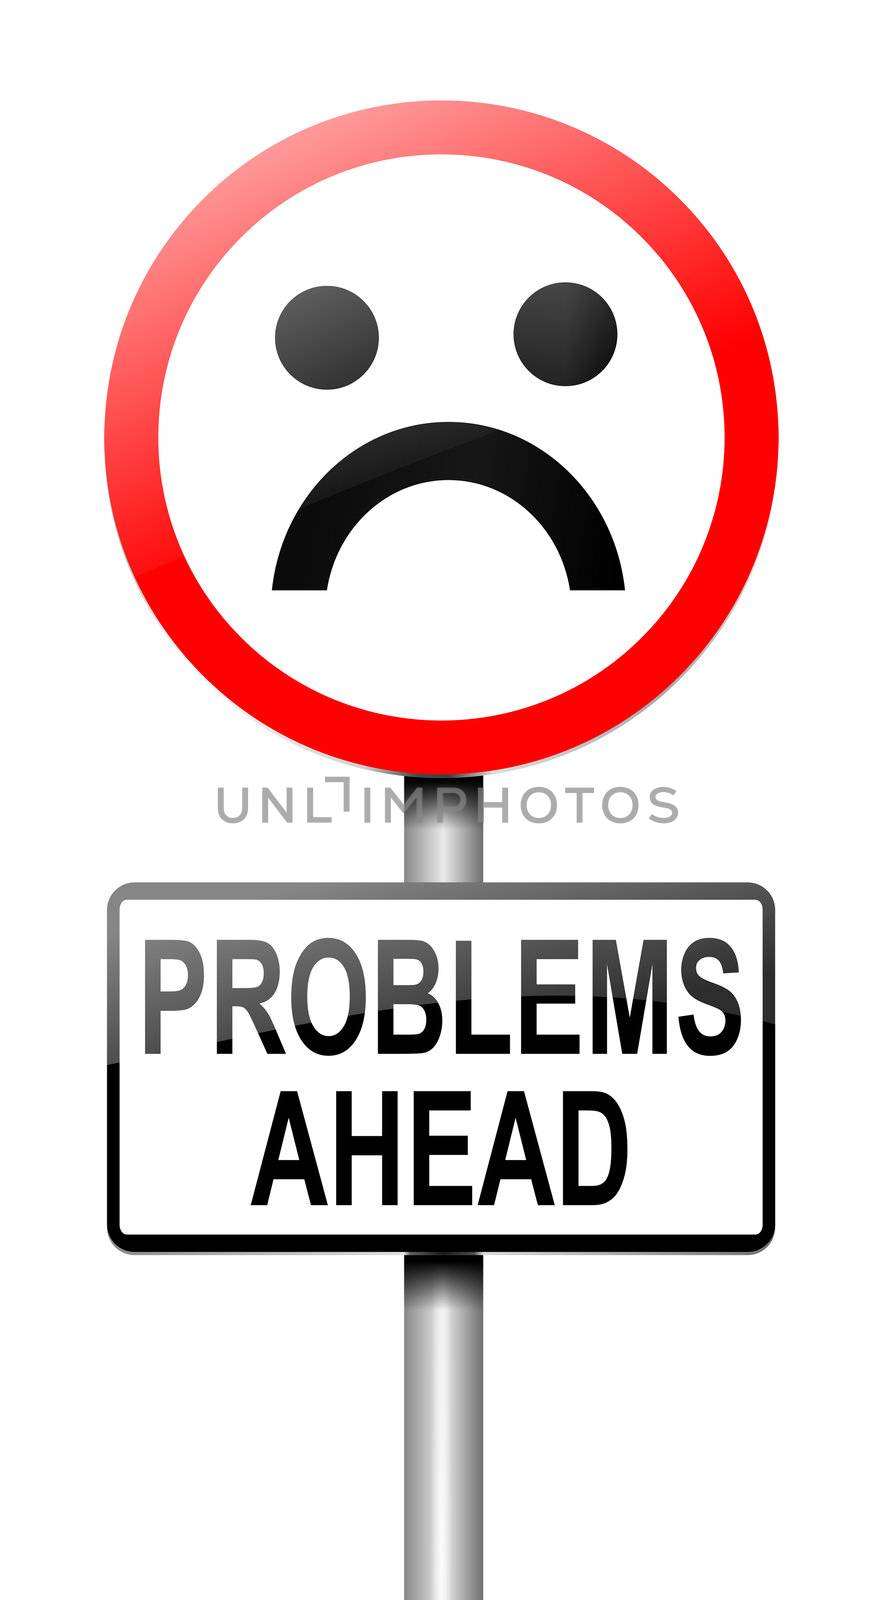 Illustration depicting a roadsign with a problem concept. White background.